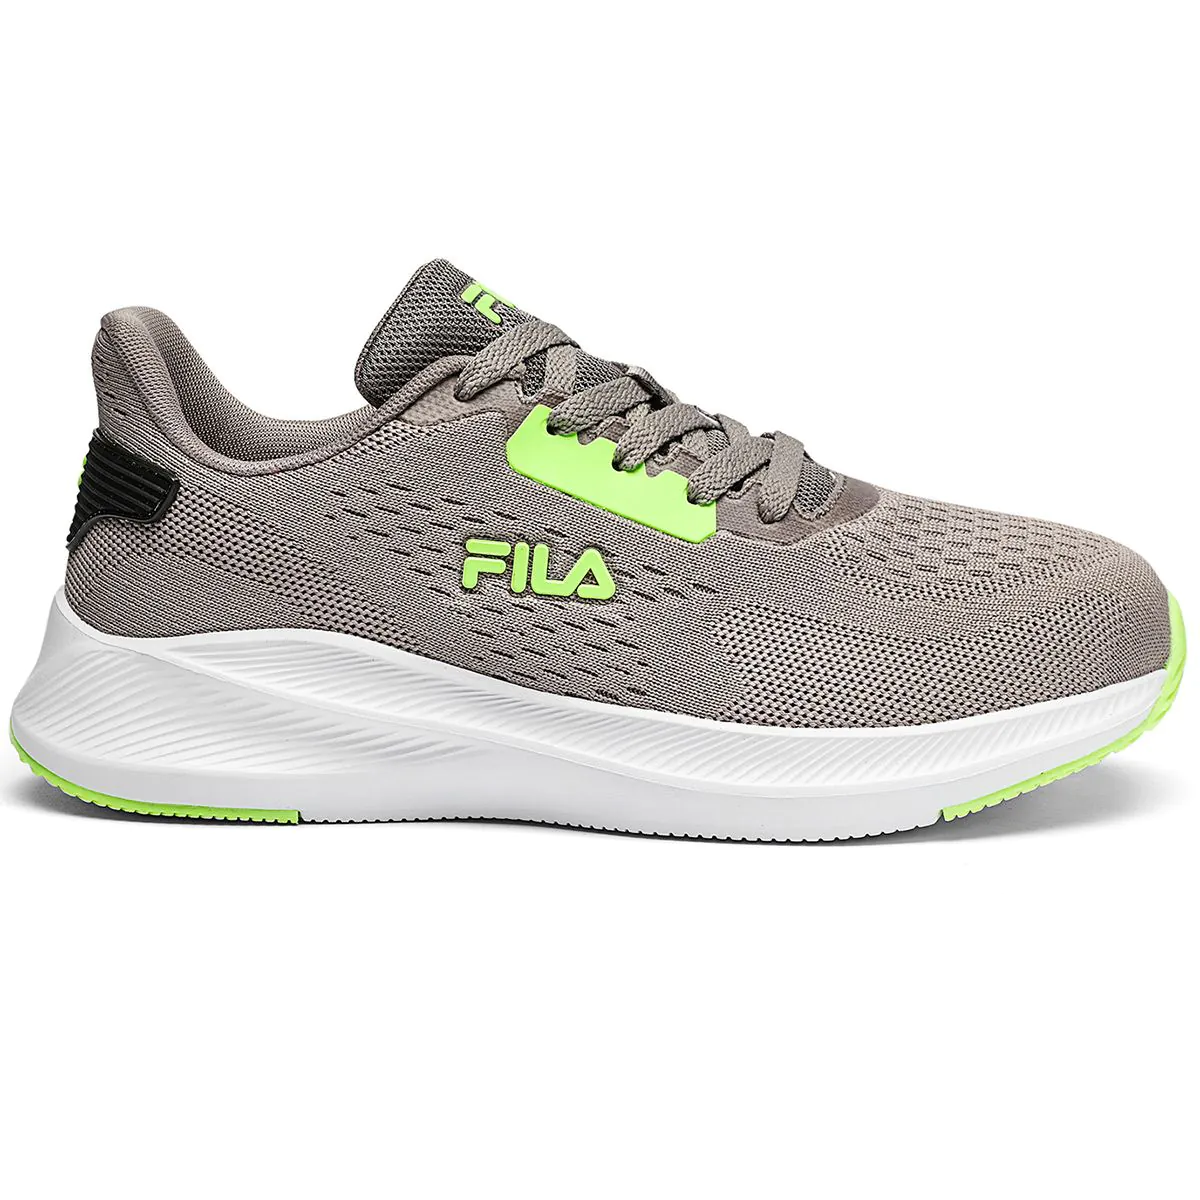 Fila Memory Coral Men's Running Shoes 1KW21010-365